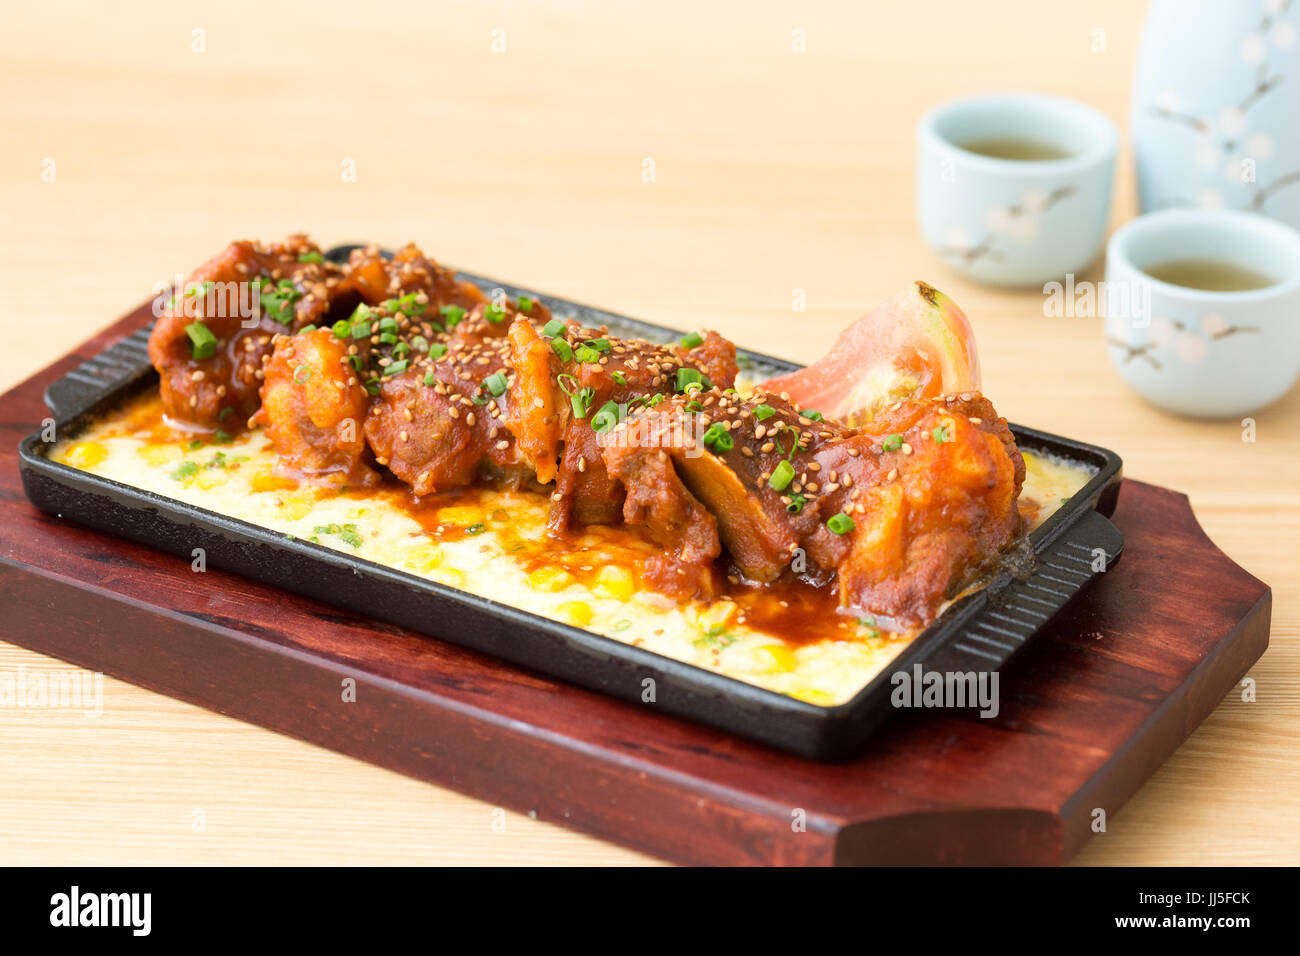 The View of Delicious Japanese Food Pork Chios on Iron Plate on the Table. Stock Photo